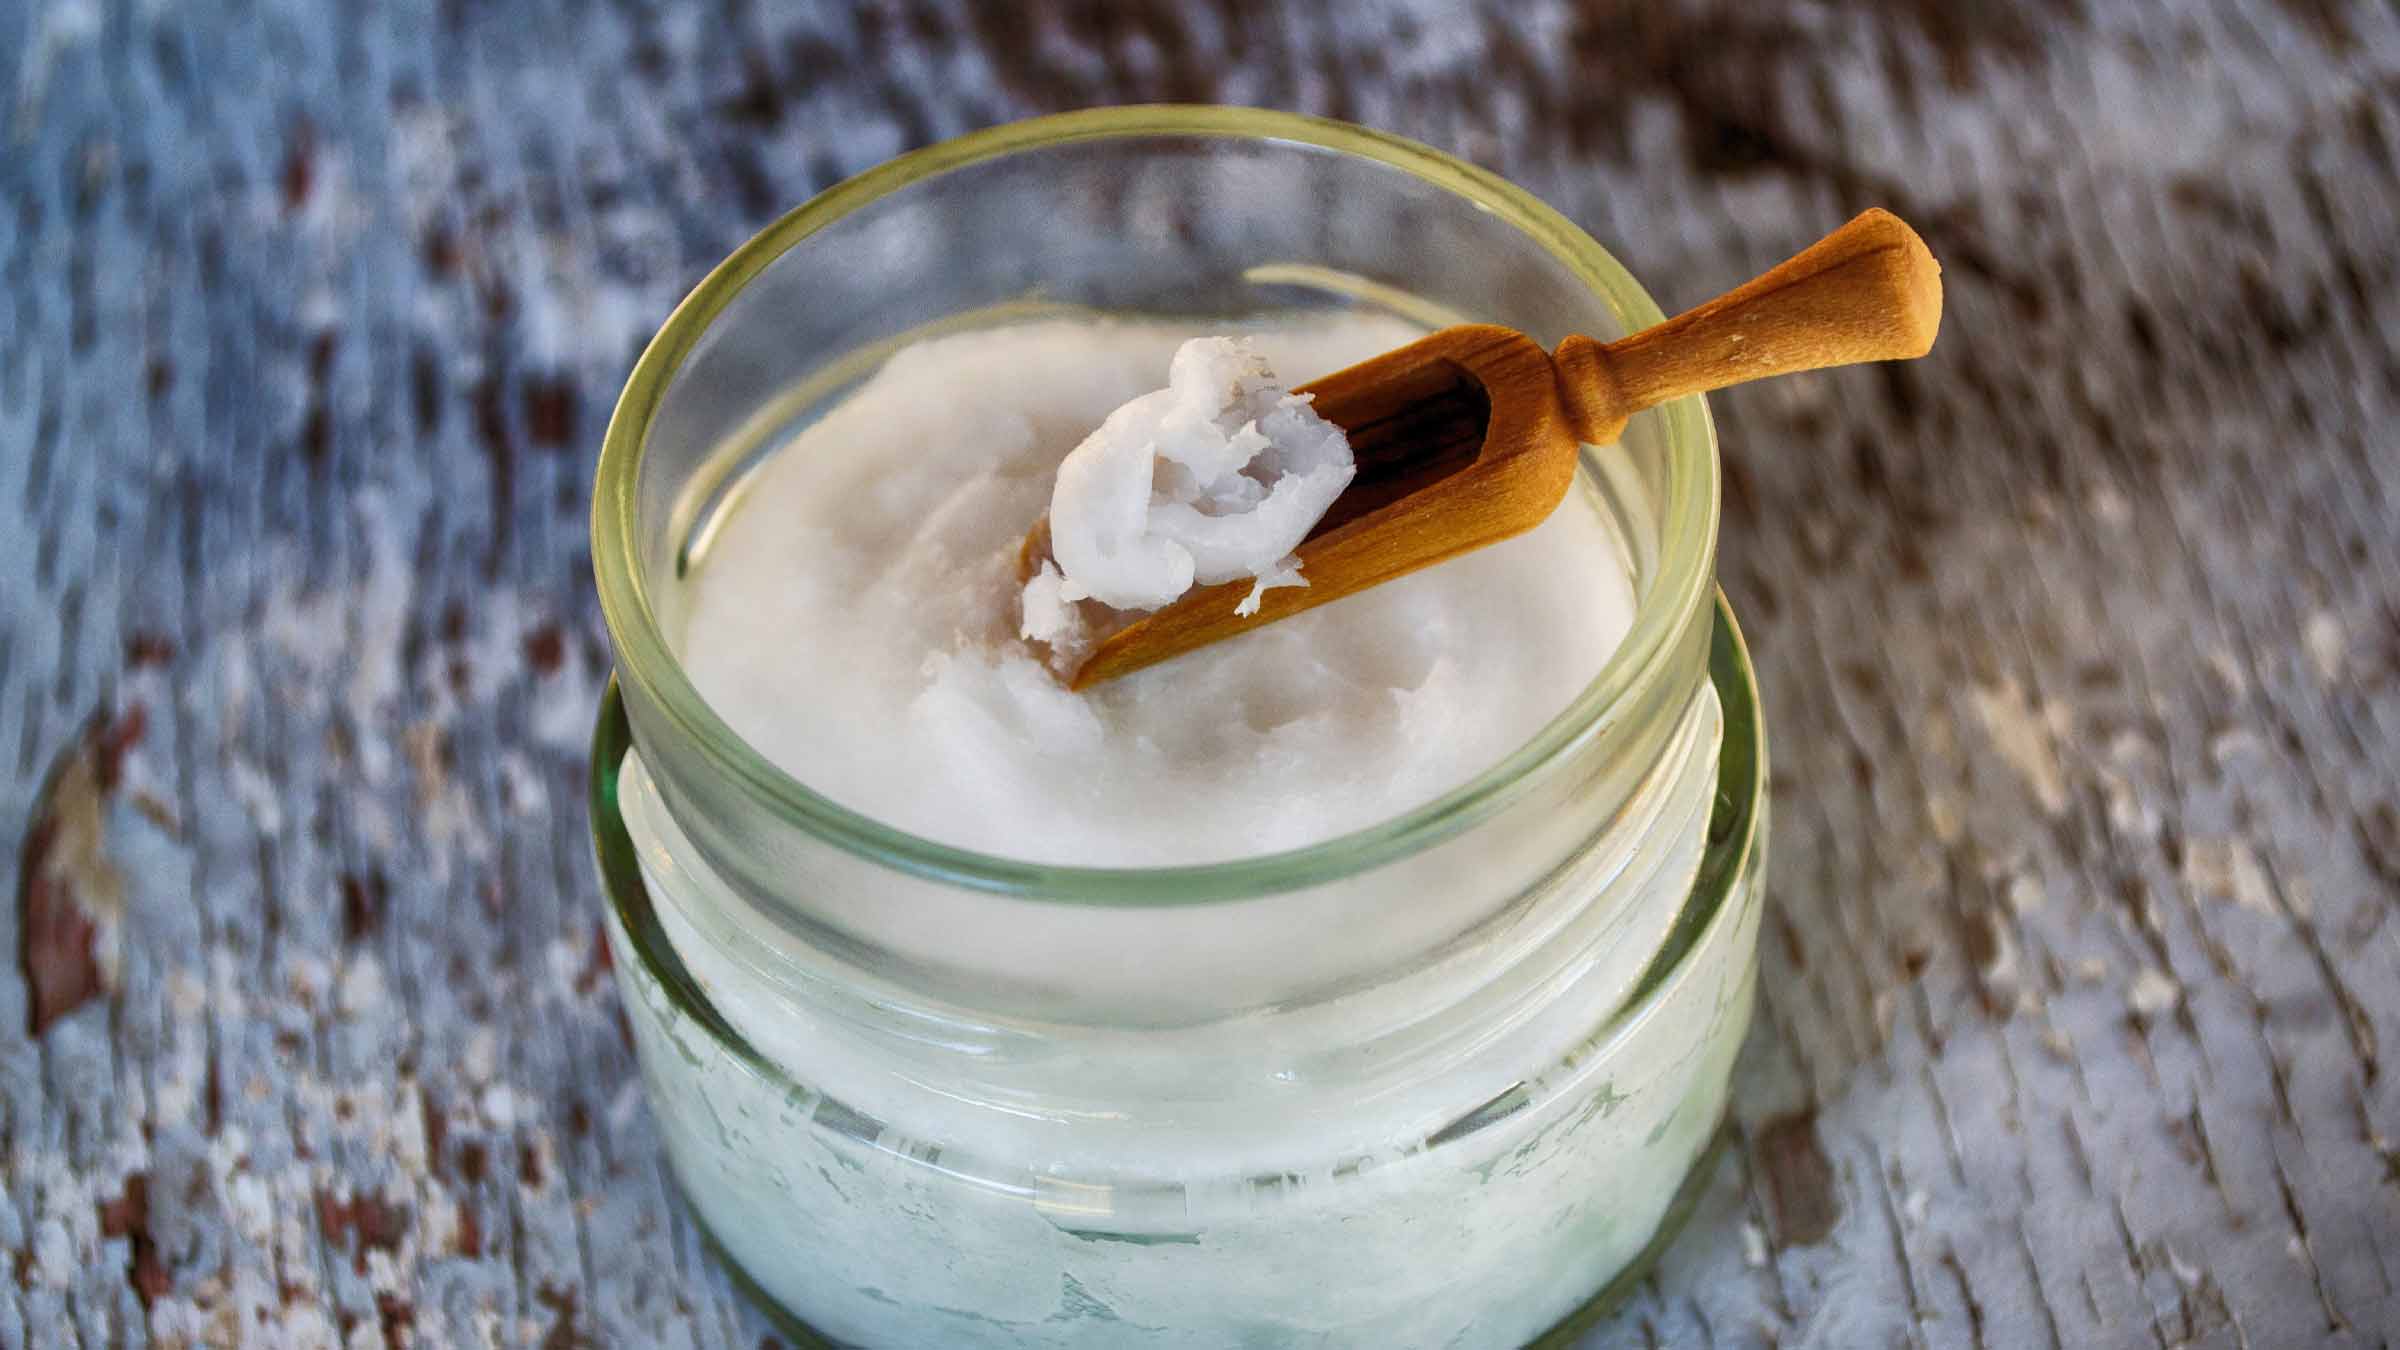 Is coconut oil good or bad for us?